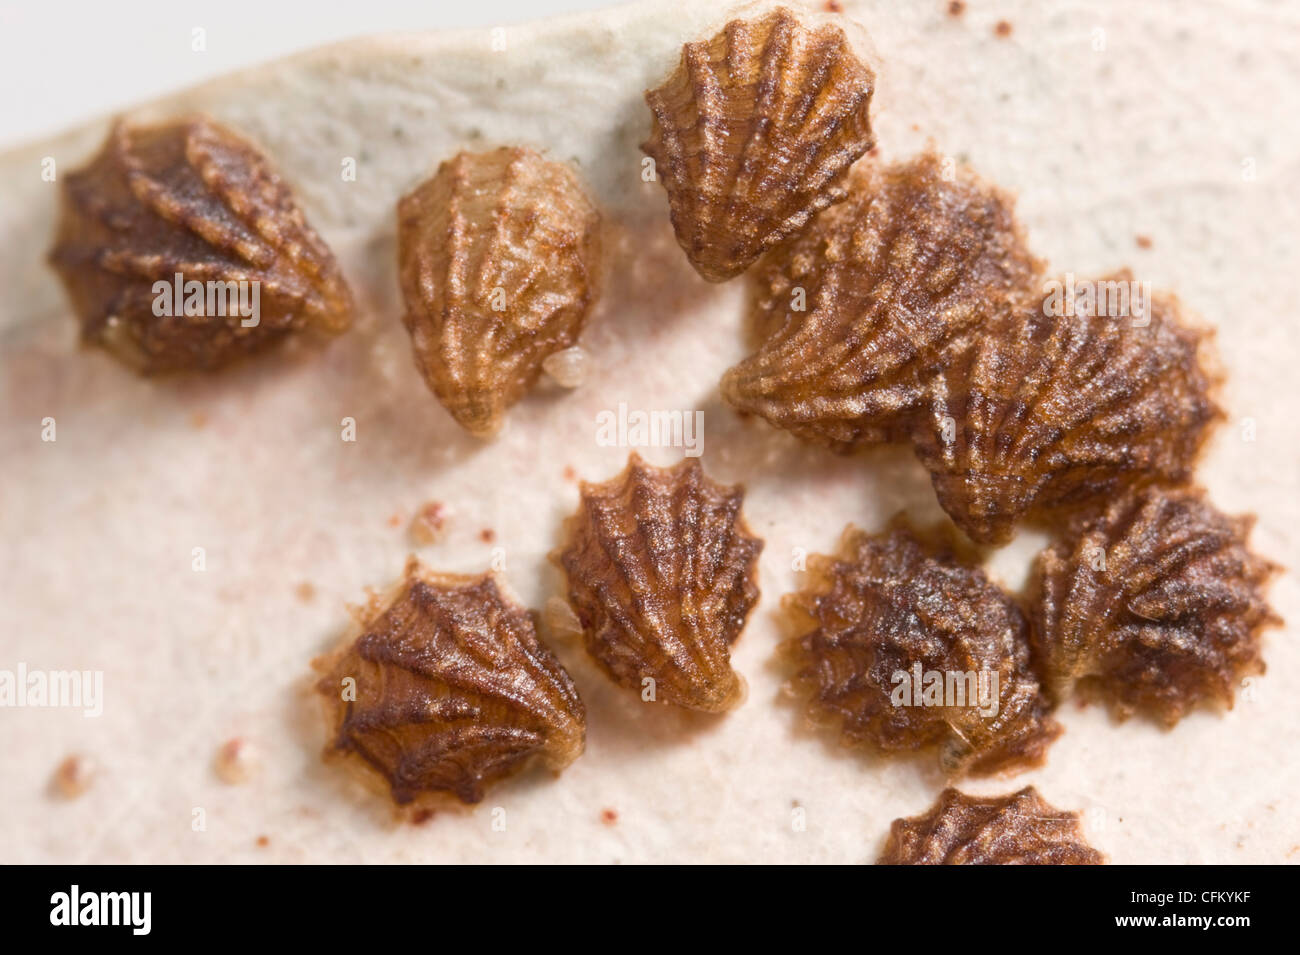 Scallop shell lerps on gumtree leaf Stock Photo